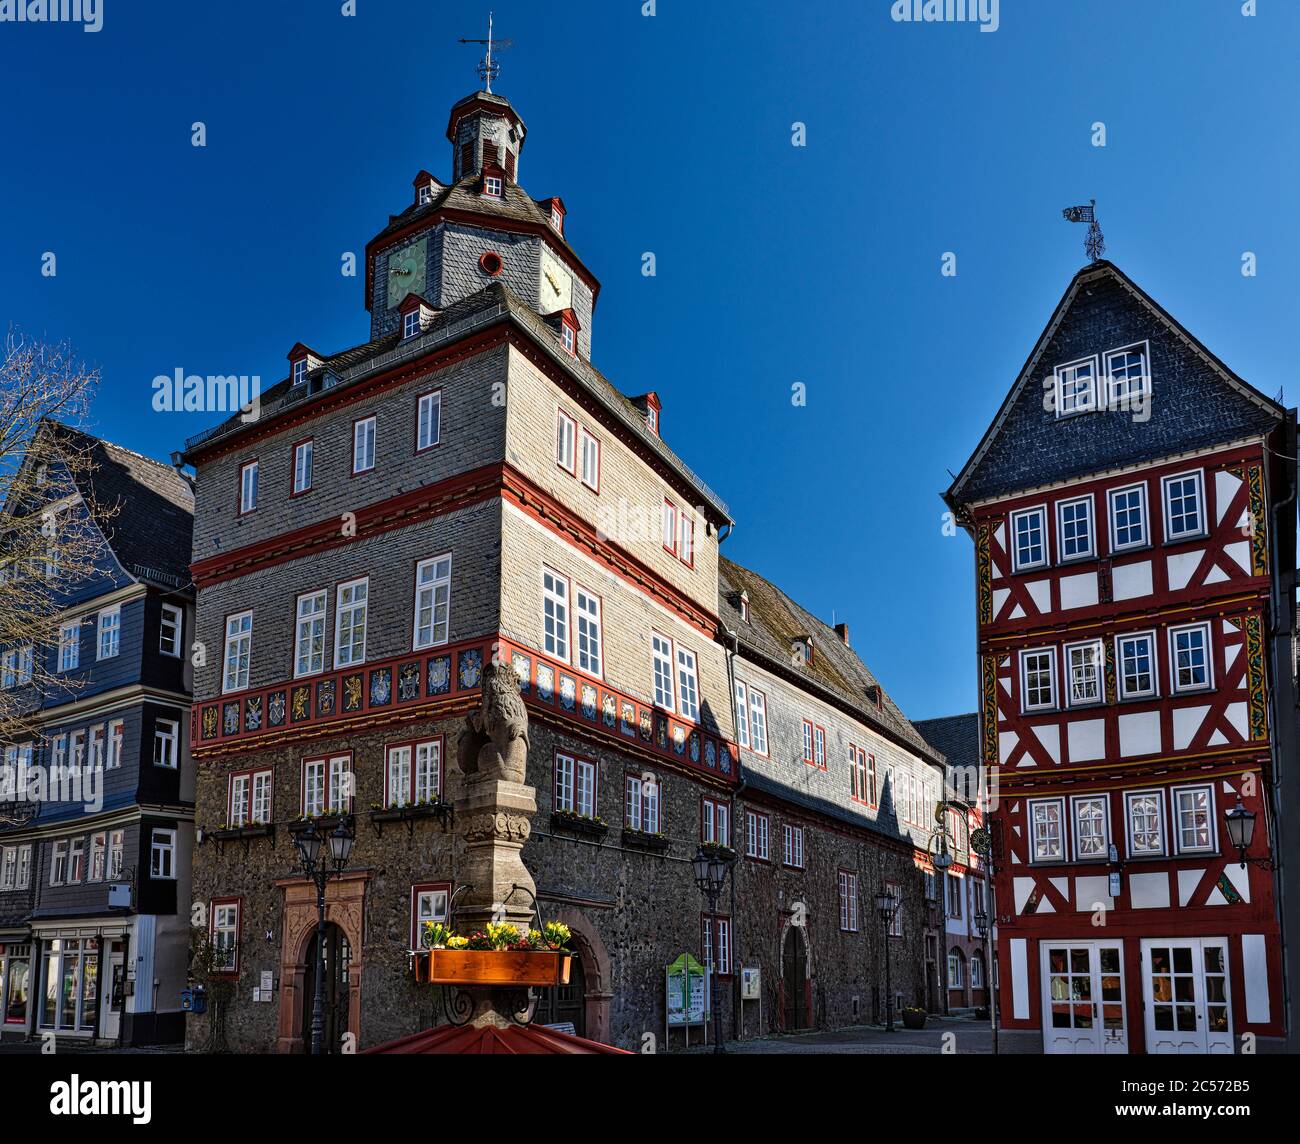 Europe, Germany, Hesse, Lahn-Dill-Bergland Nature Park, city of Herborn, market square with historic town hall and half-timbered houses Stock Photo